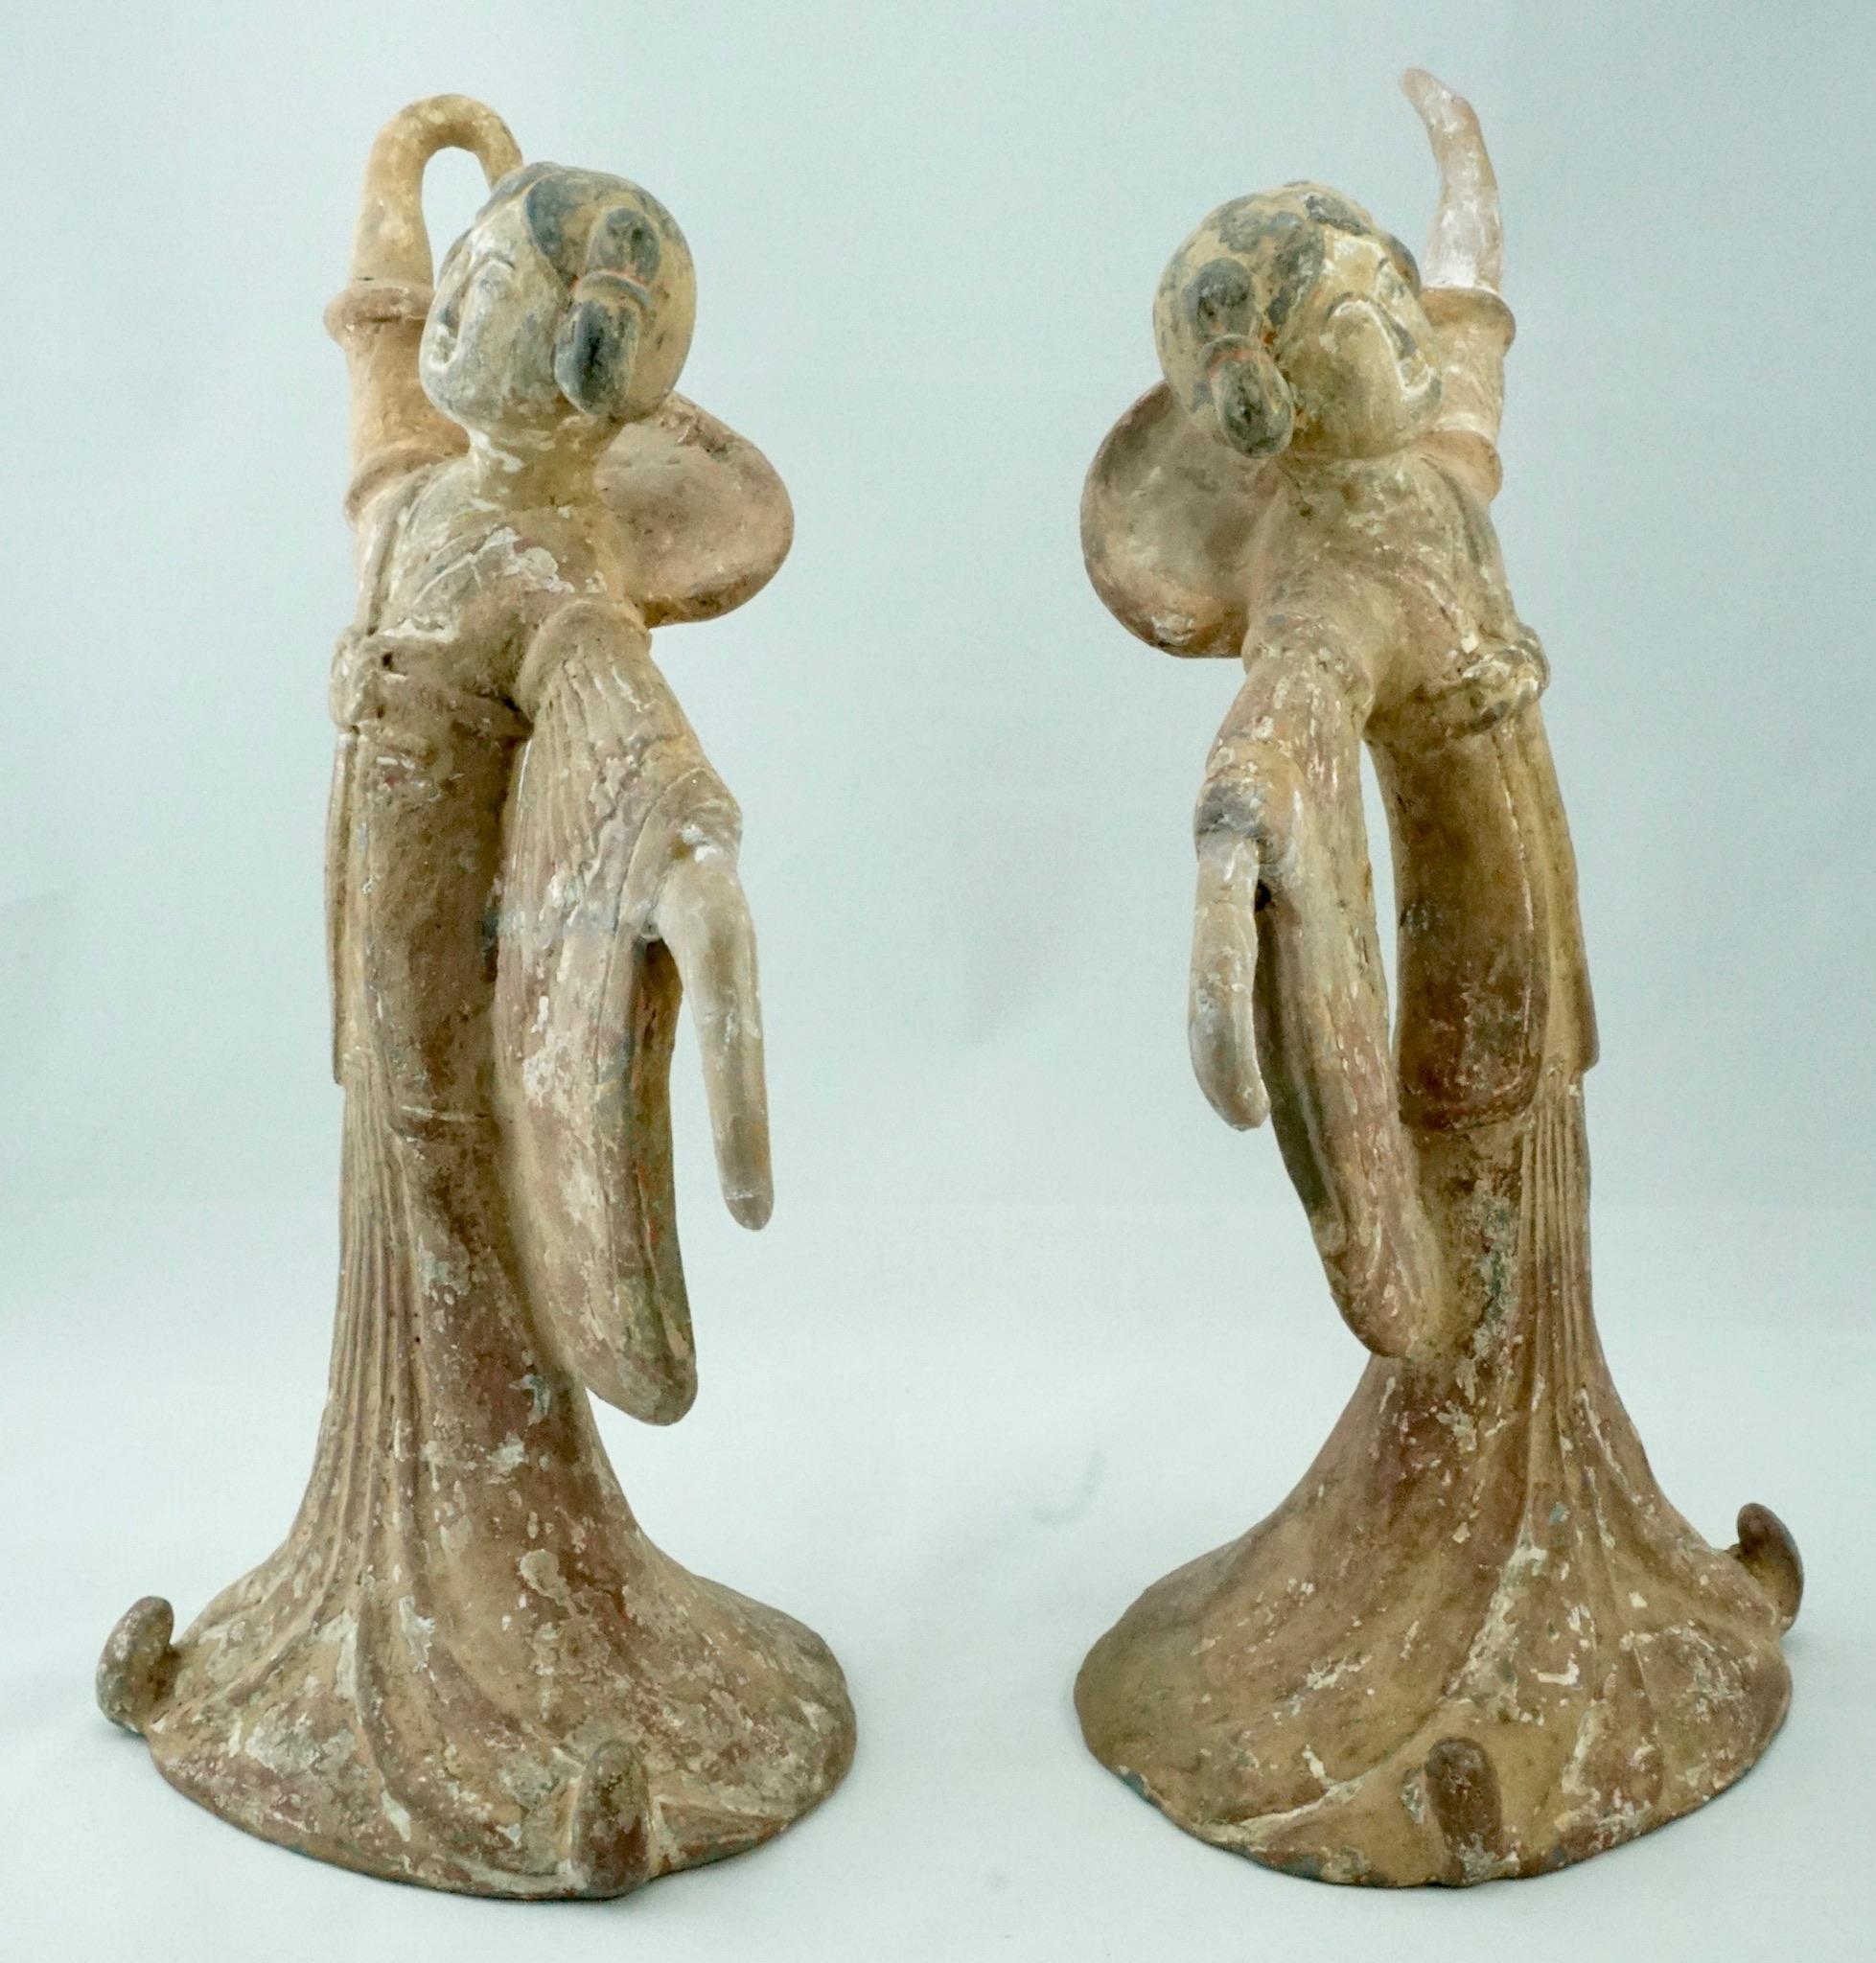 Period: Tang Dynasty (618 – 907 AD) terra-cotta over lead clay

A pair of delicate Tang Dynasty dancers with long sleeves. Both ladies are wearing a long flowing dress with flared sleeves. Their facial features are accentuated with black and white